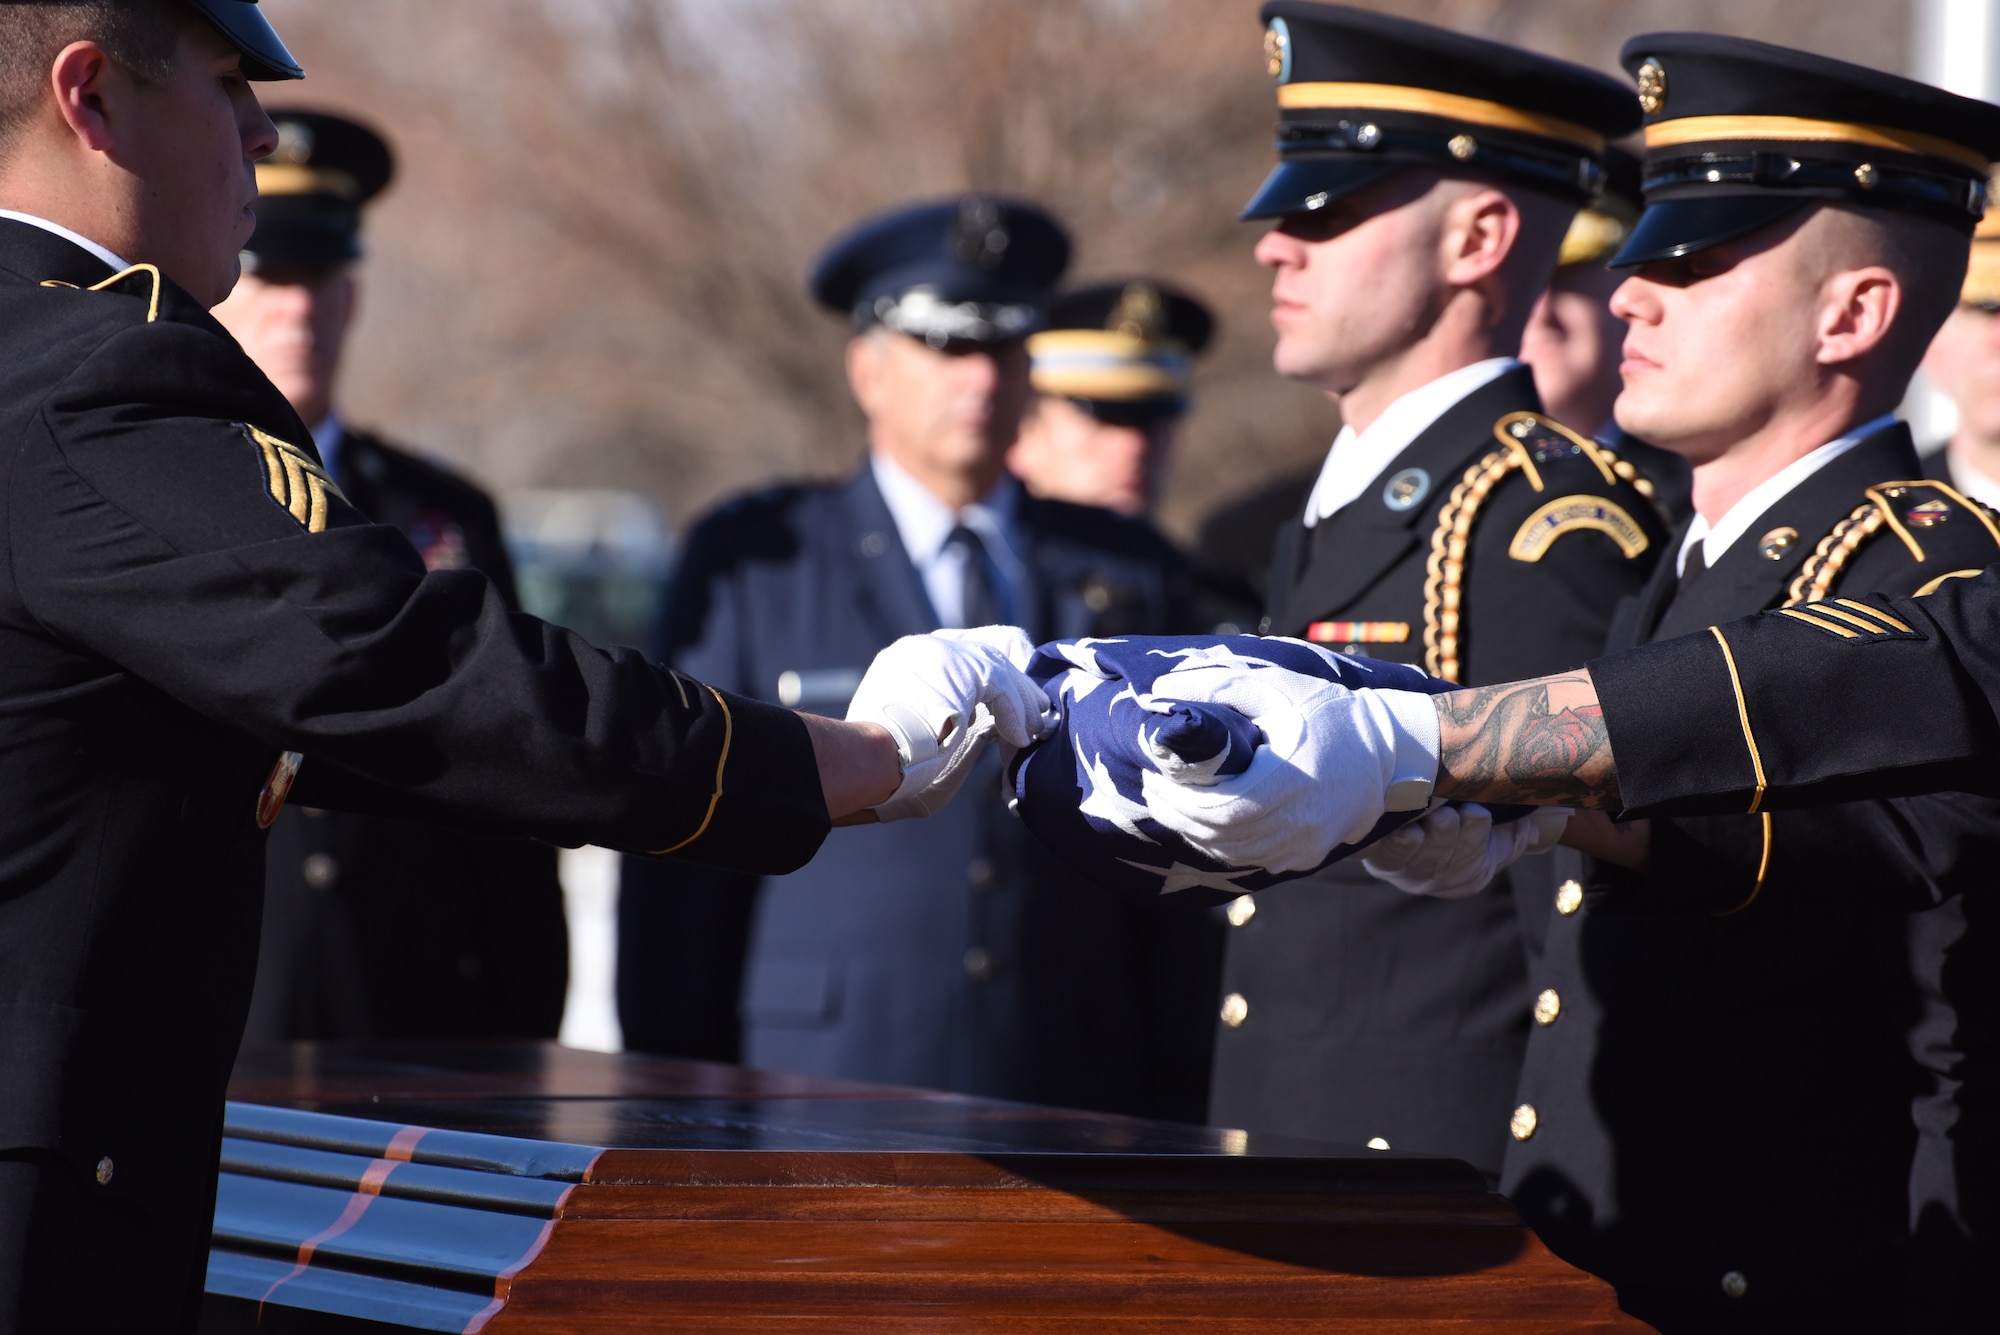 Medal of Honor recipient U.S. Army Pvt. George “Joe” Sakato is interred at Fairmount Cemetery in Denver, Jan. 16, 2016. Sakato, living in Colorado, was laid to rest with full military honors. Sakato distinguished himself by extraordinary heroism in action Oct. 29, 1944, on Hill 617 in the vicinity of Biffontaine, France. (U.S. Army National Guard photo by Staff Sgt. Manda Walters/Released)